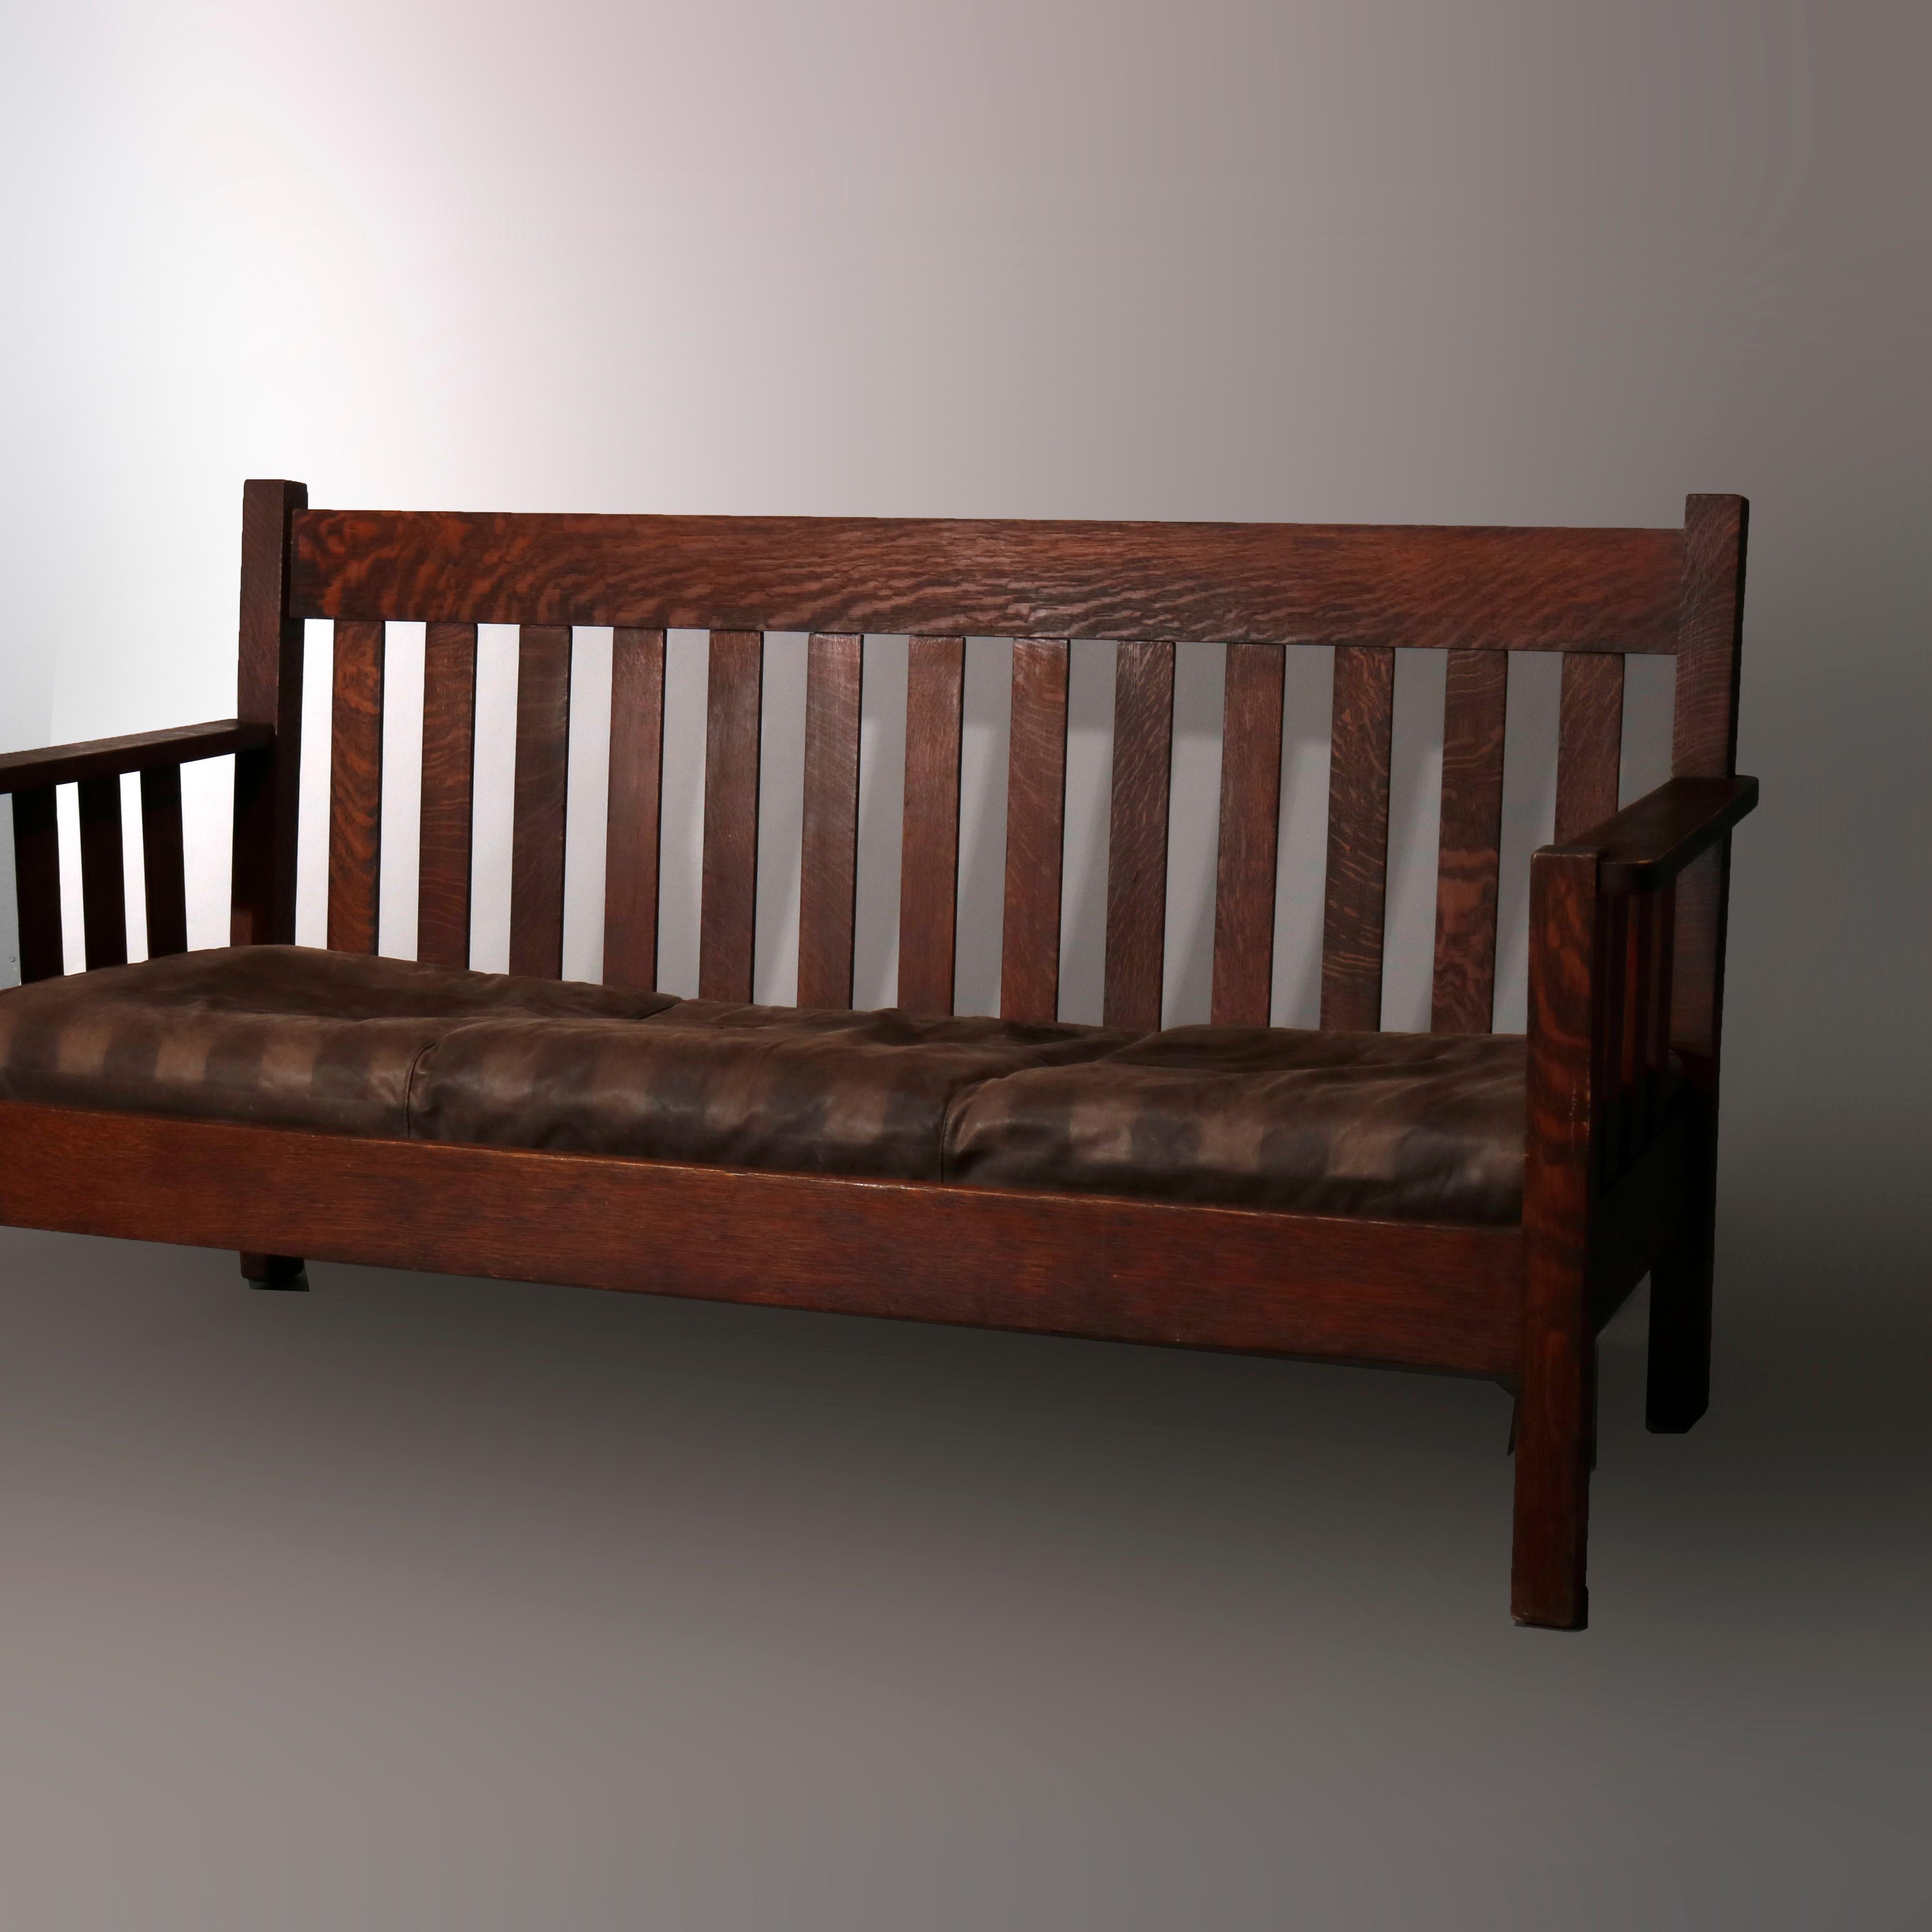 An antique Arts and Crafts Mission sofa in the manner of Stickley Brothers offers quarter sawn oak construction with slat back and sides, raised on square and straight legs, c1910

Measures - 37.5